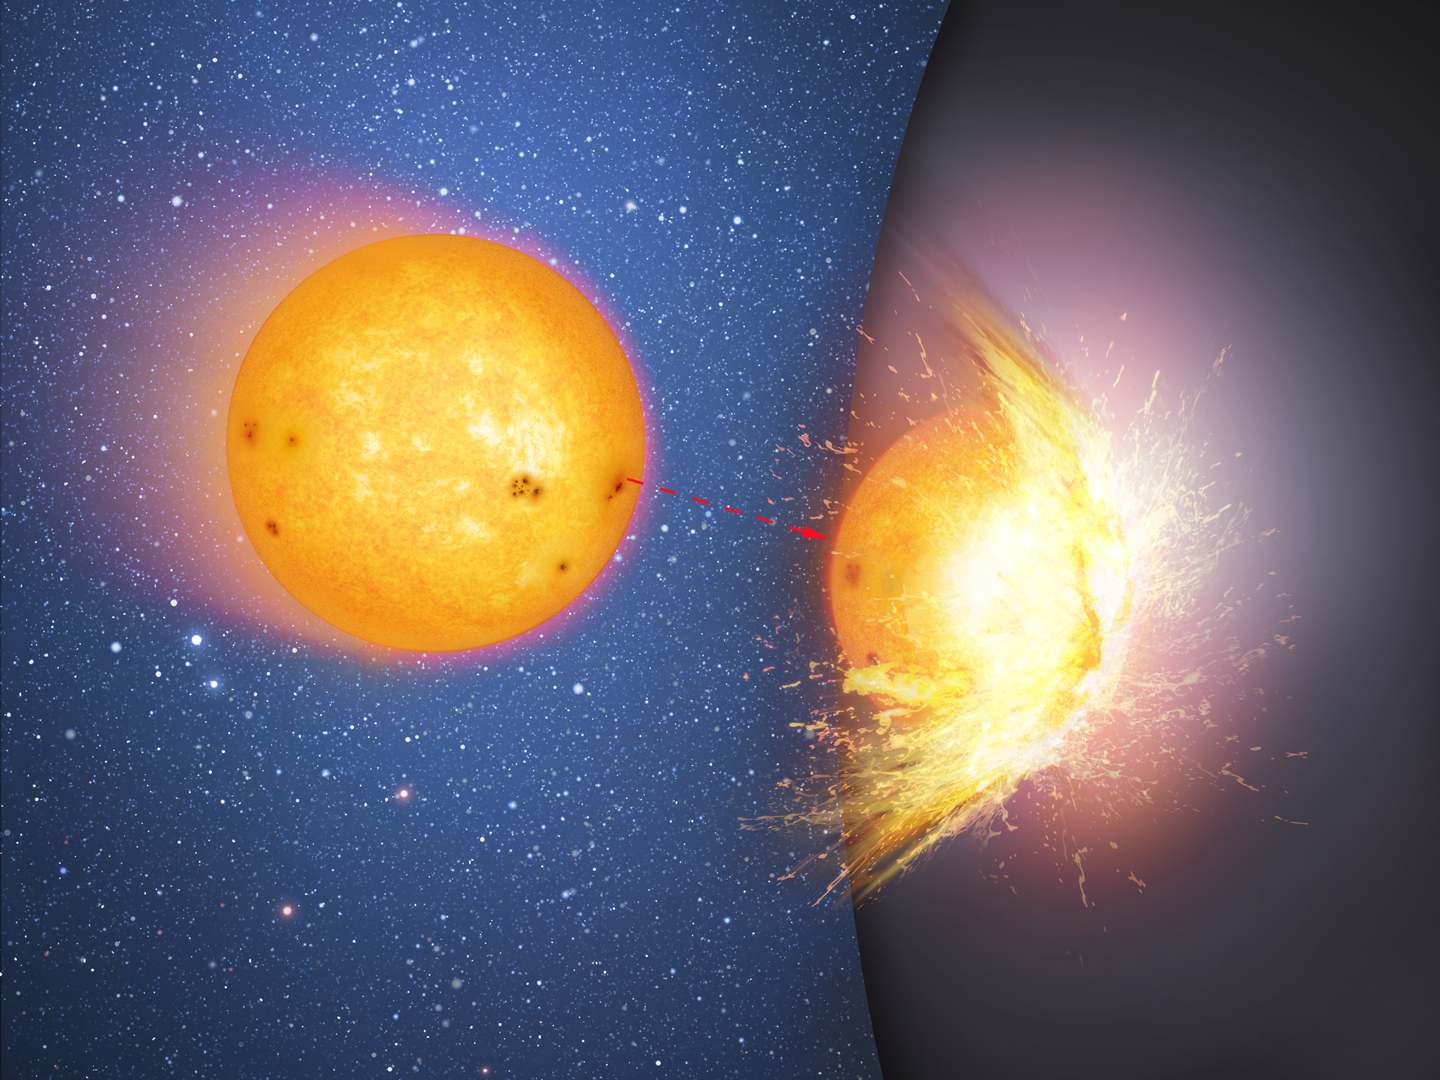 This is the first in a sequence of two artist&#039;s impressions that shows a huge, massive sphere in the center of a galaxy, rather than a supermassive black hole. Here a star moves towards and then smashes into the hard surface of the sphere, flinging out debris. The impact heats up the site of the collision.